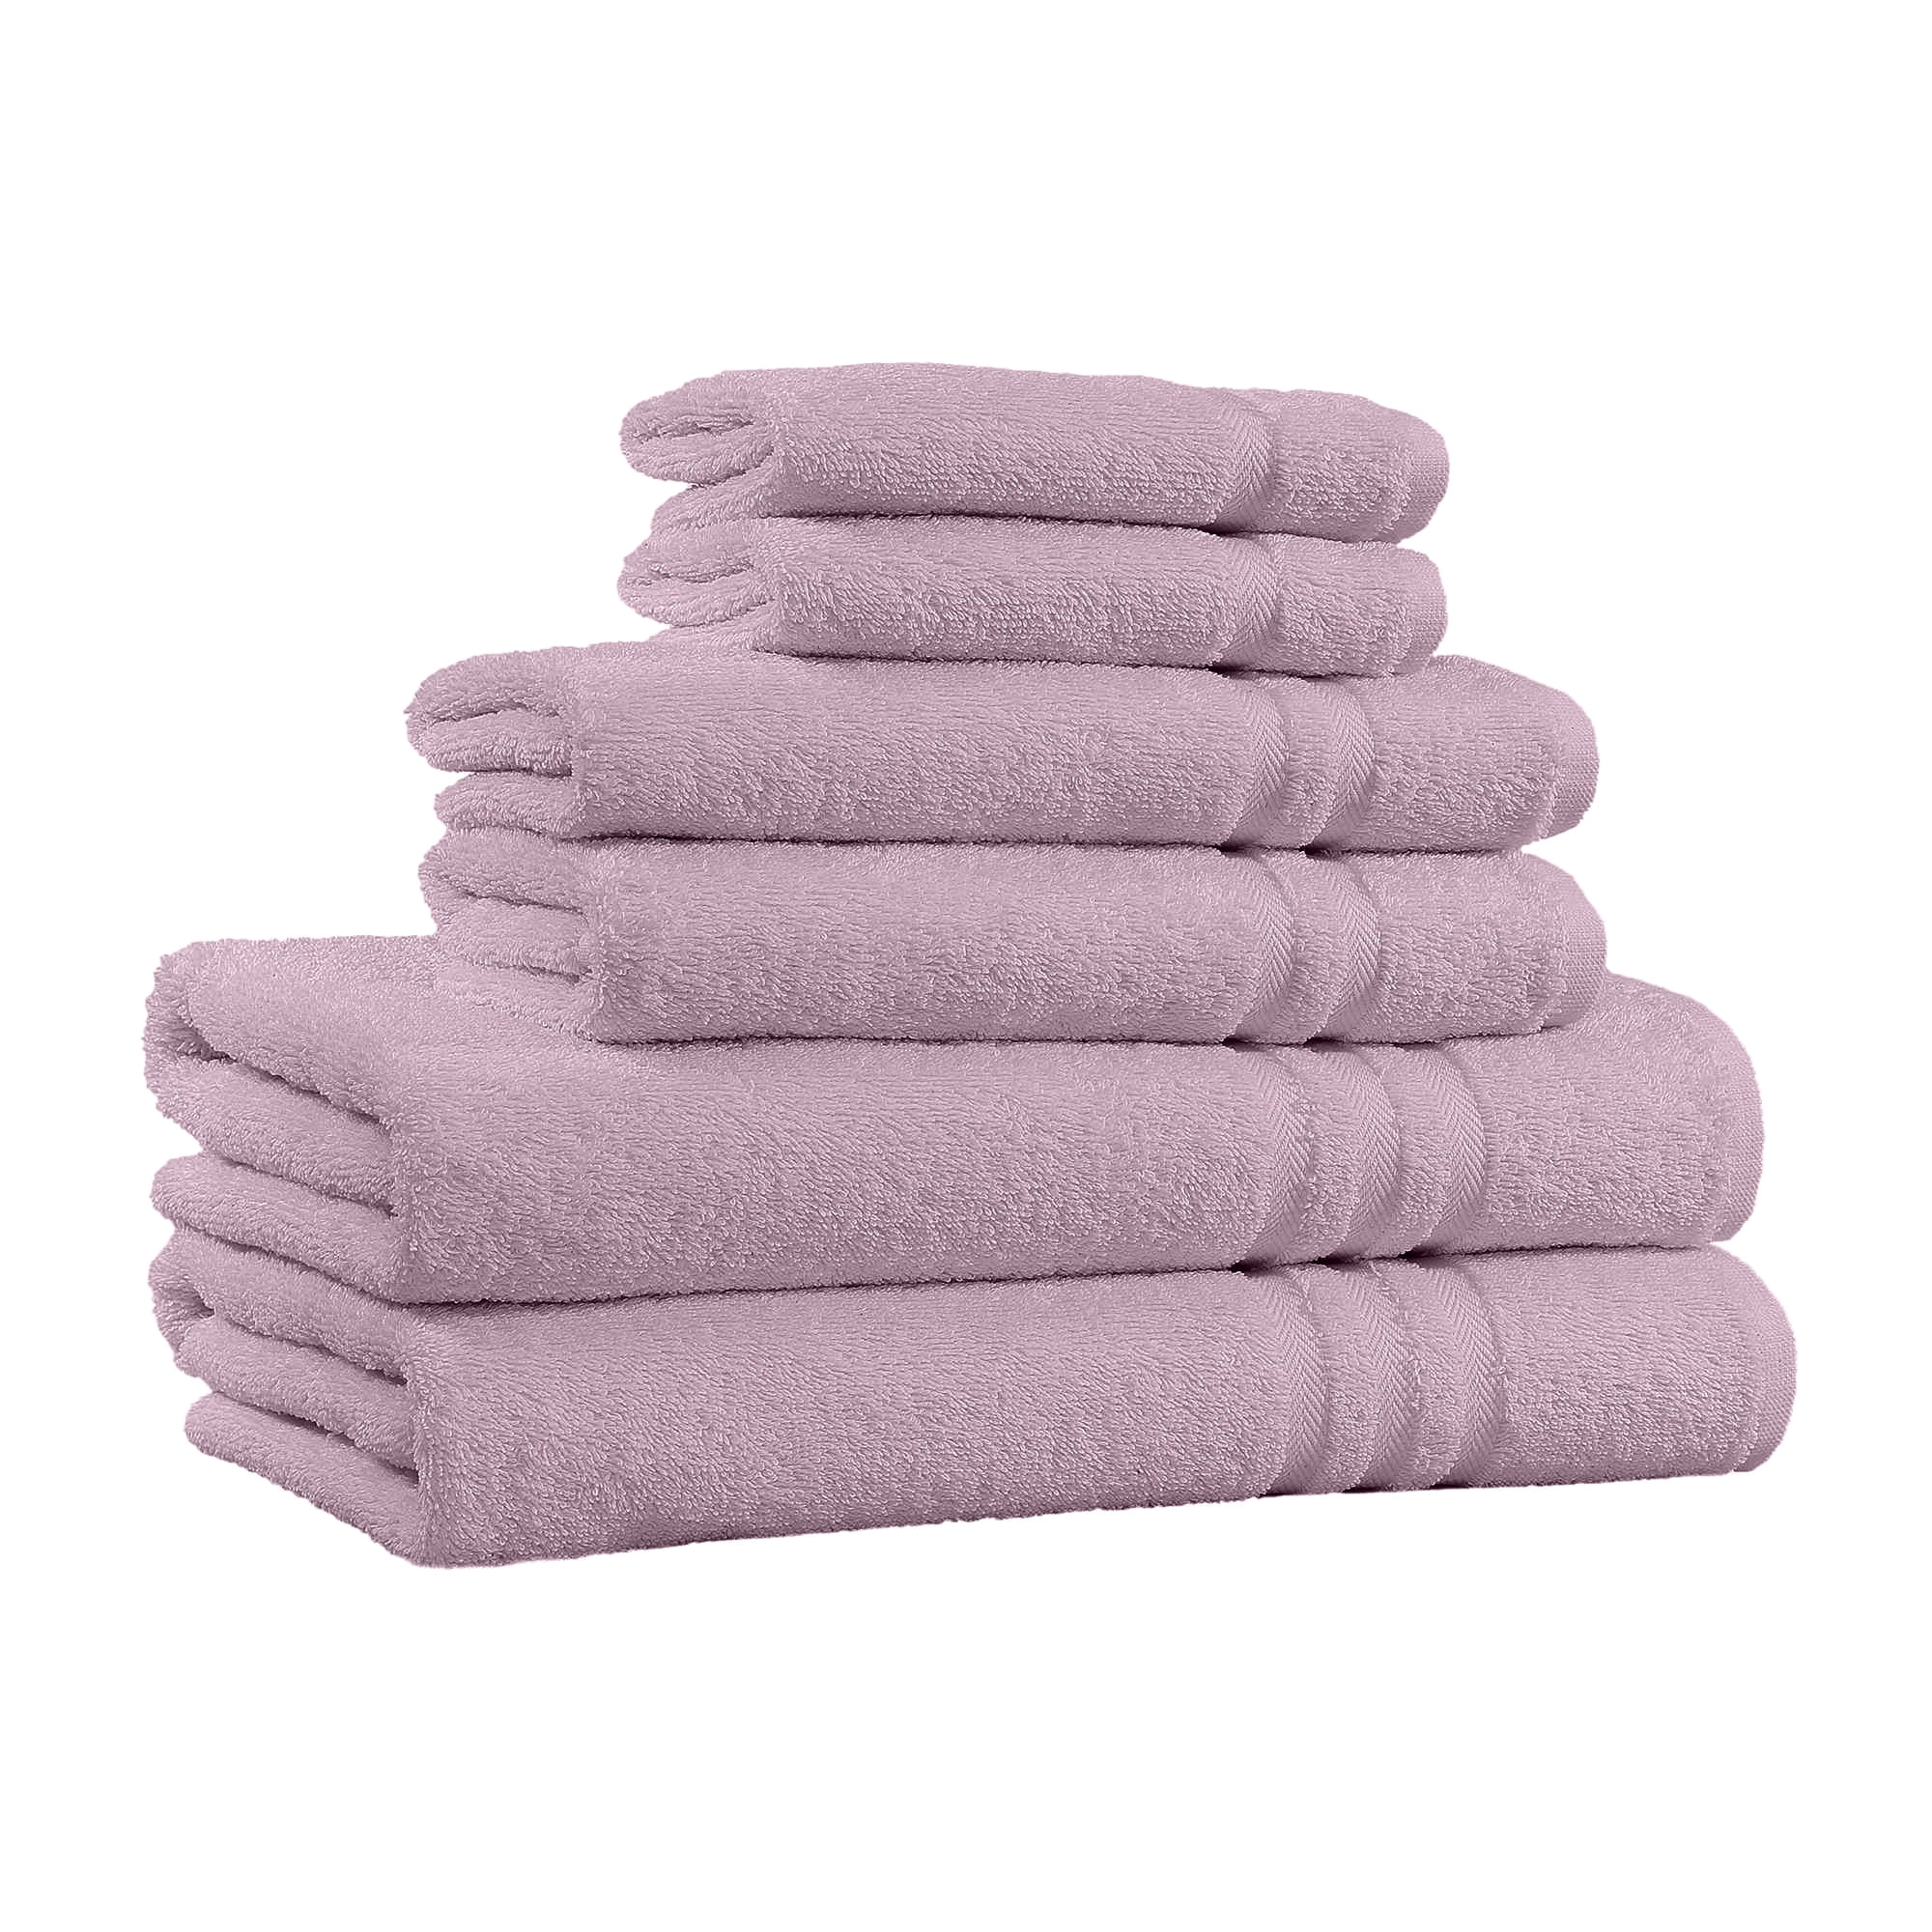 6 Piece Cotton Bath and Hand Towel Set Super Absorbent Pink And Navy Blue 